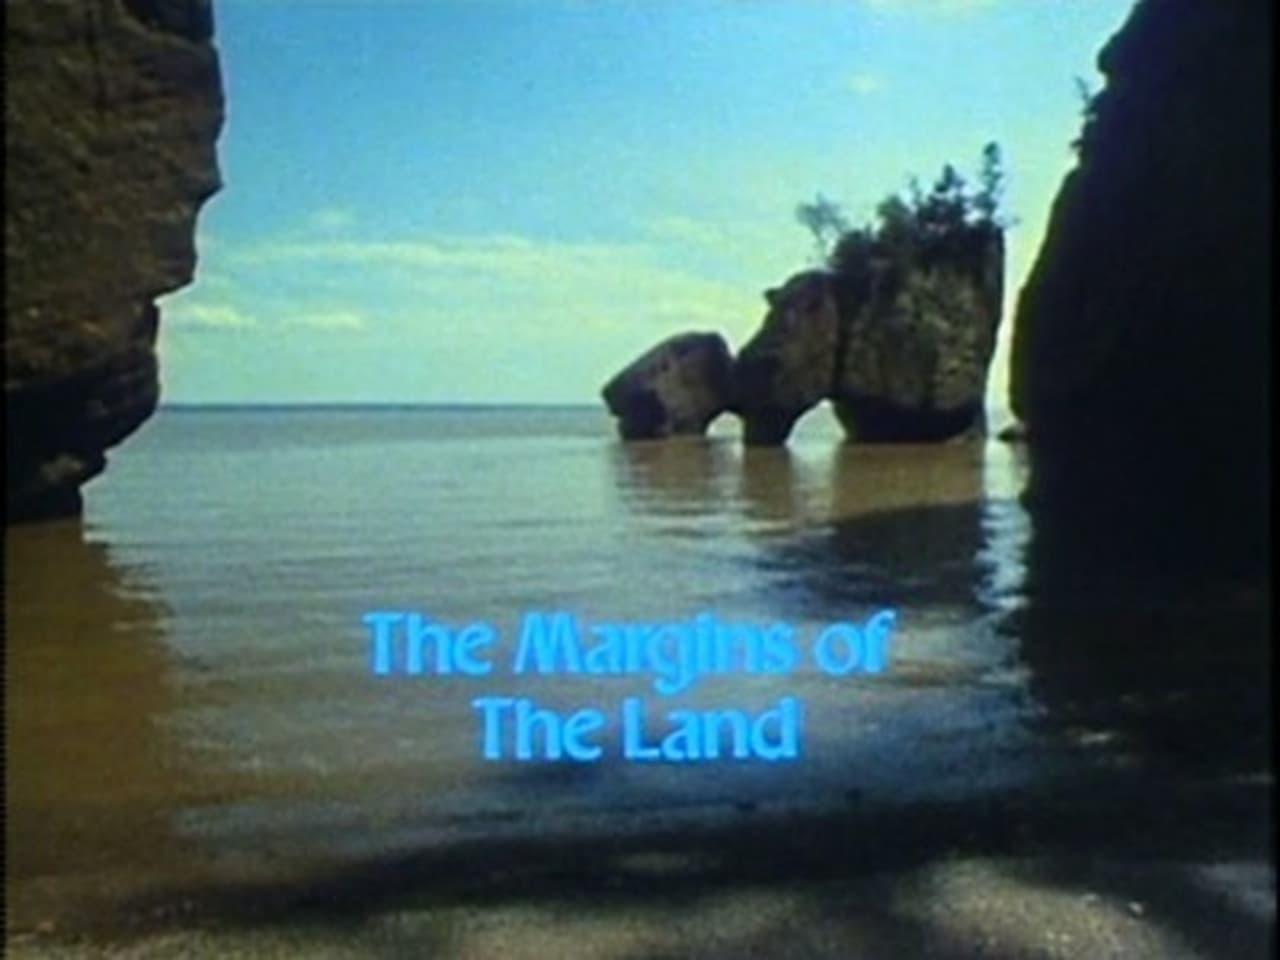 The Margins of the Land